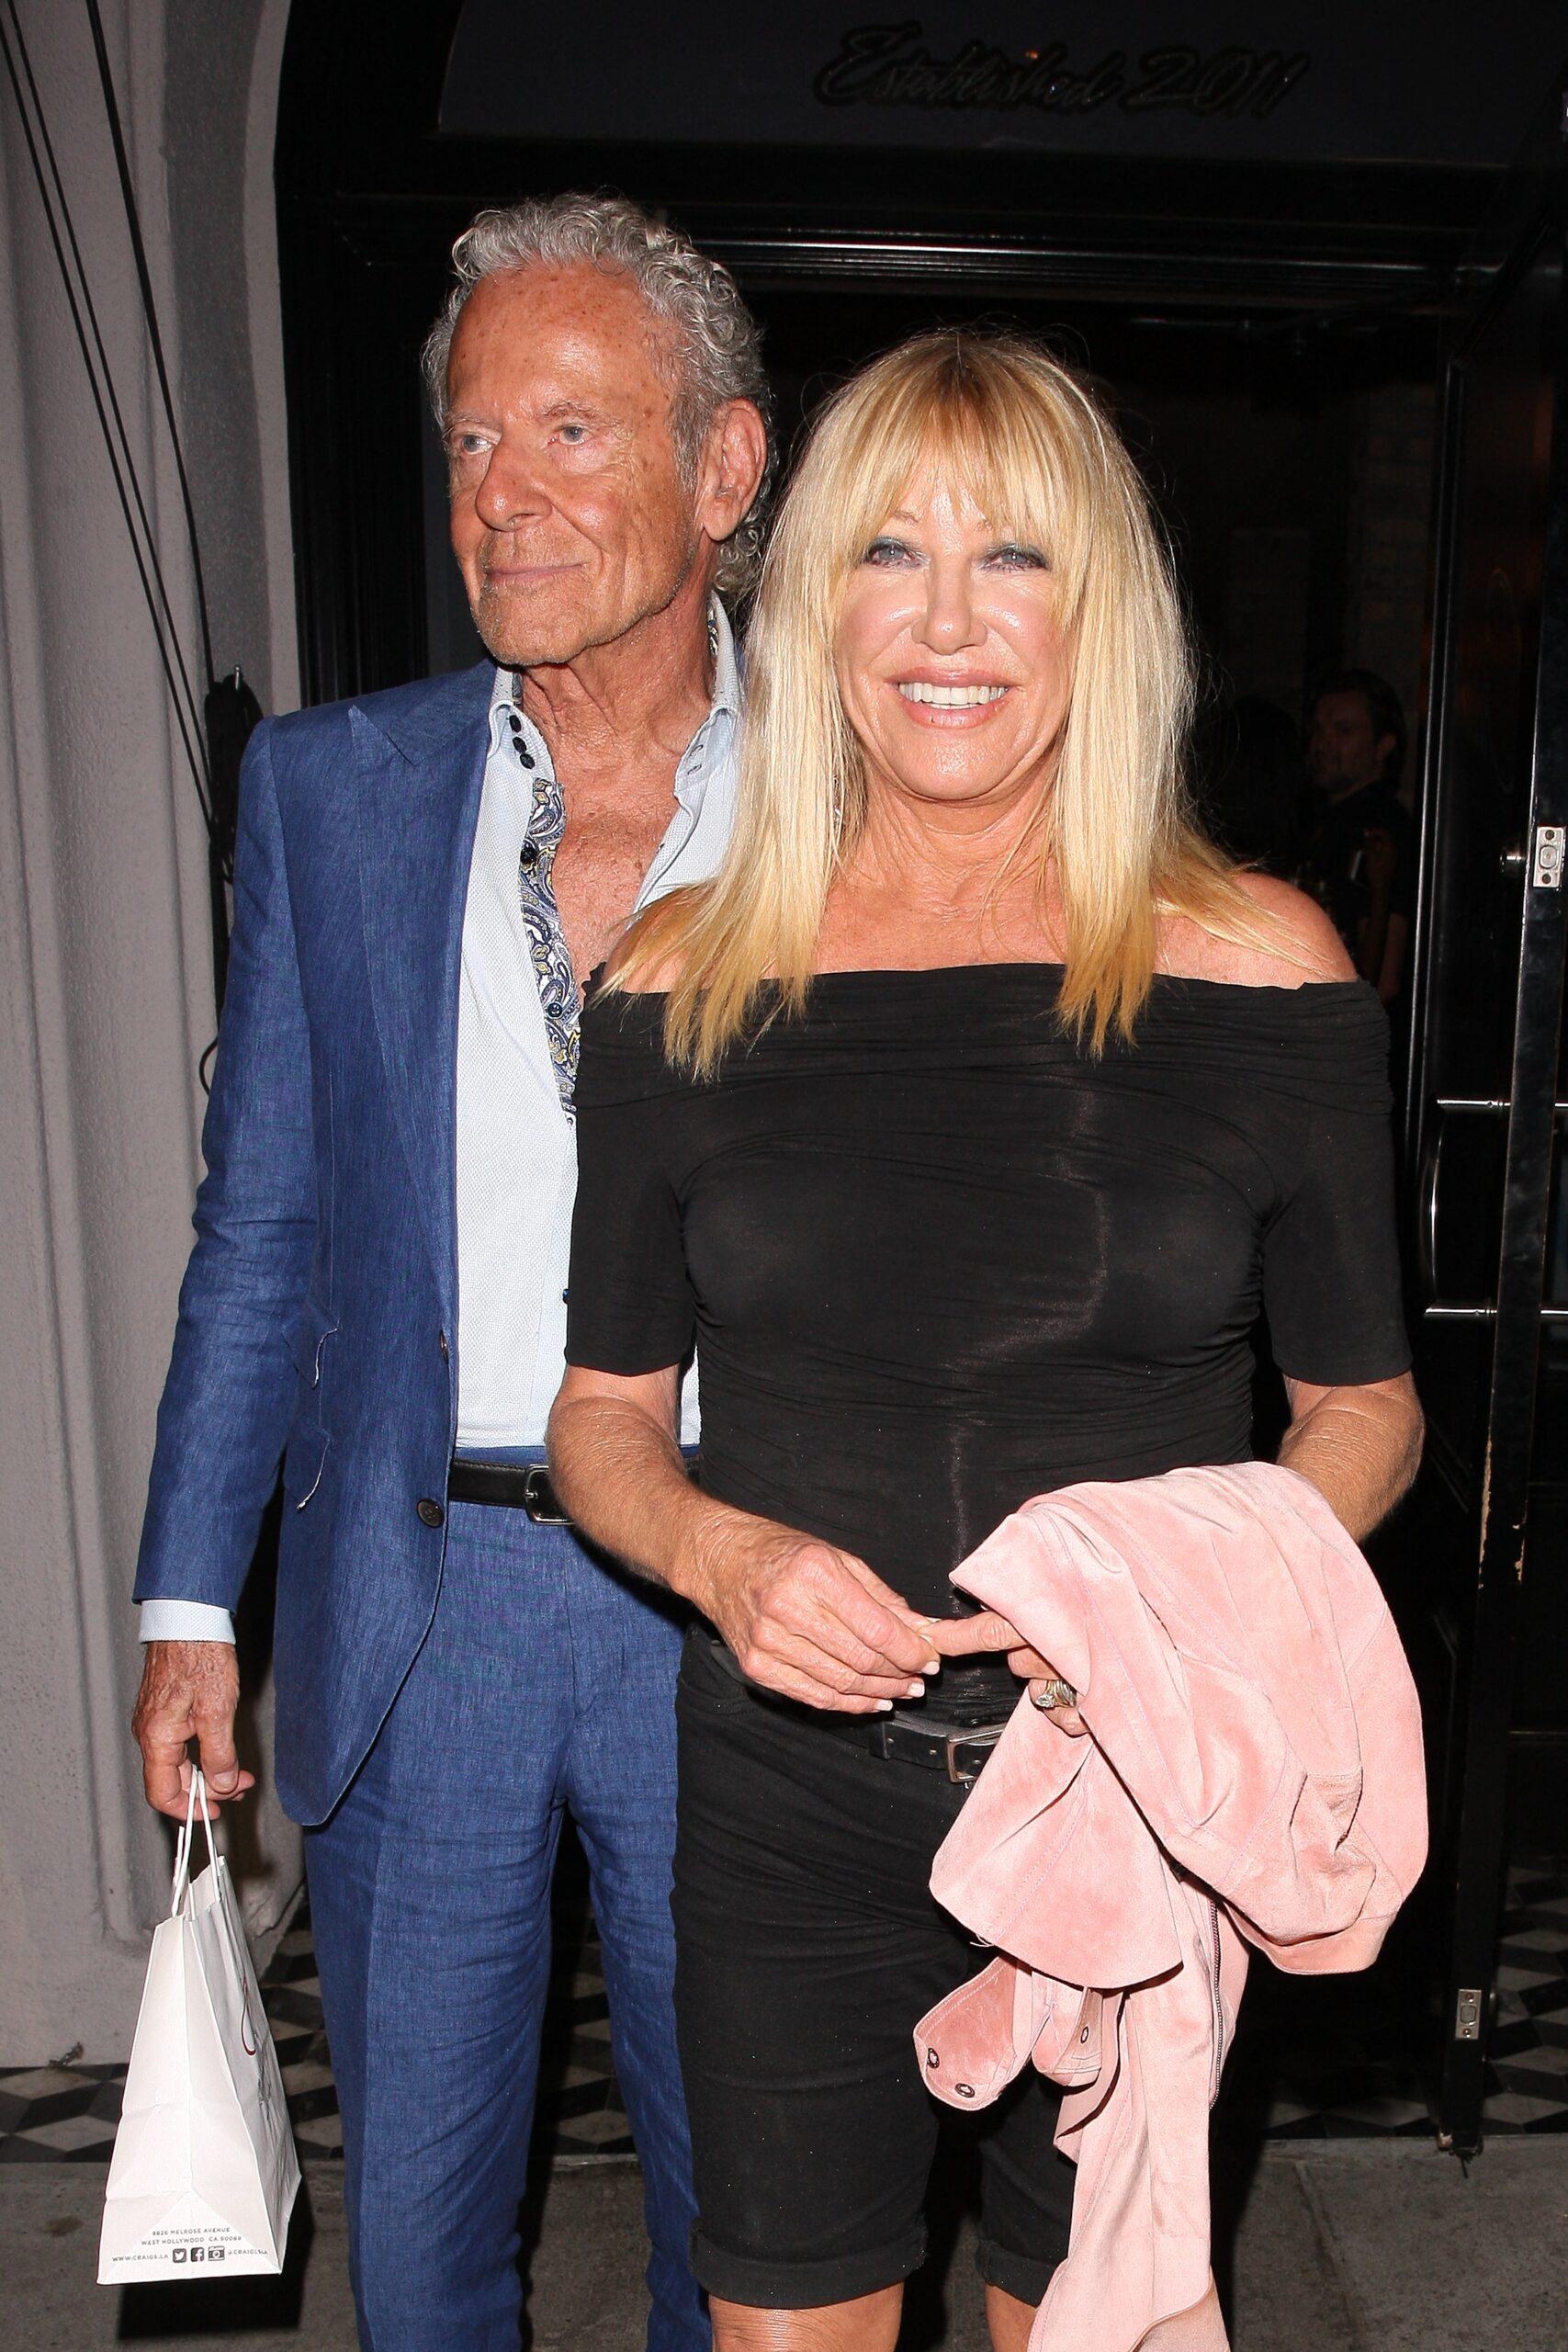 Suzanne Somers and husband Alan Hamel are seen leaving Craig's restaurant after having dinner on Emmy night